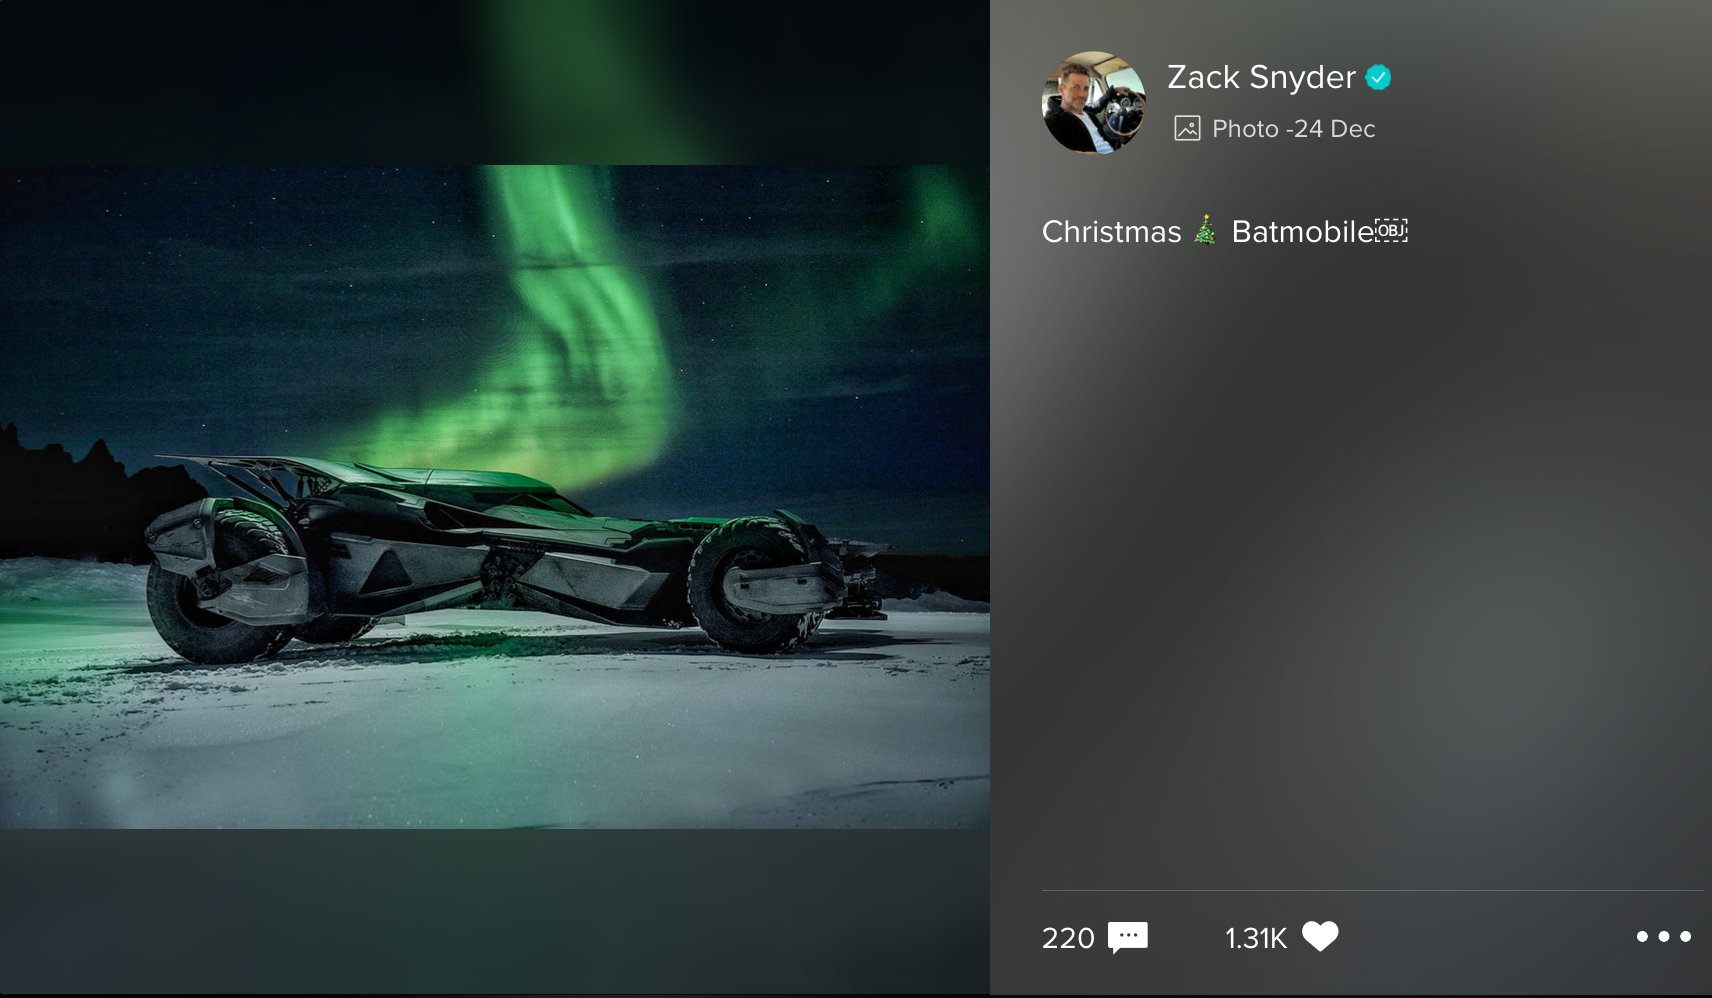 A Christmas-themed image shared by Zack Snyder on Vero of Batman's Batmobile in the DC Extended Universe.